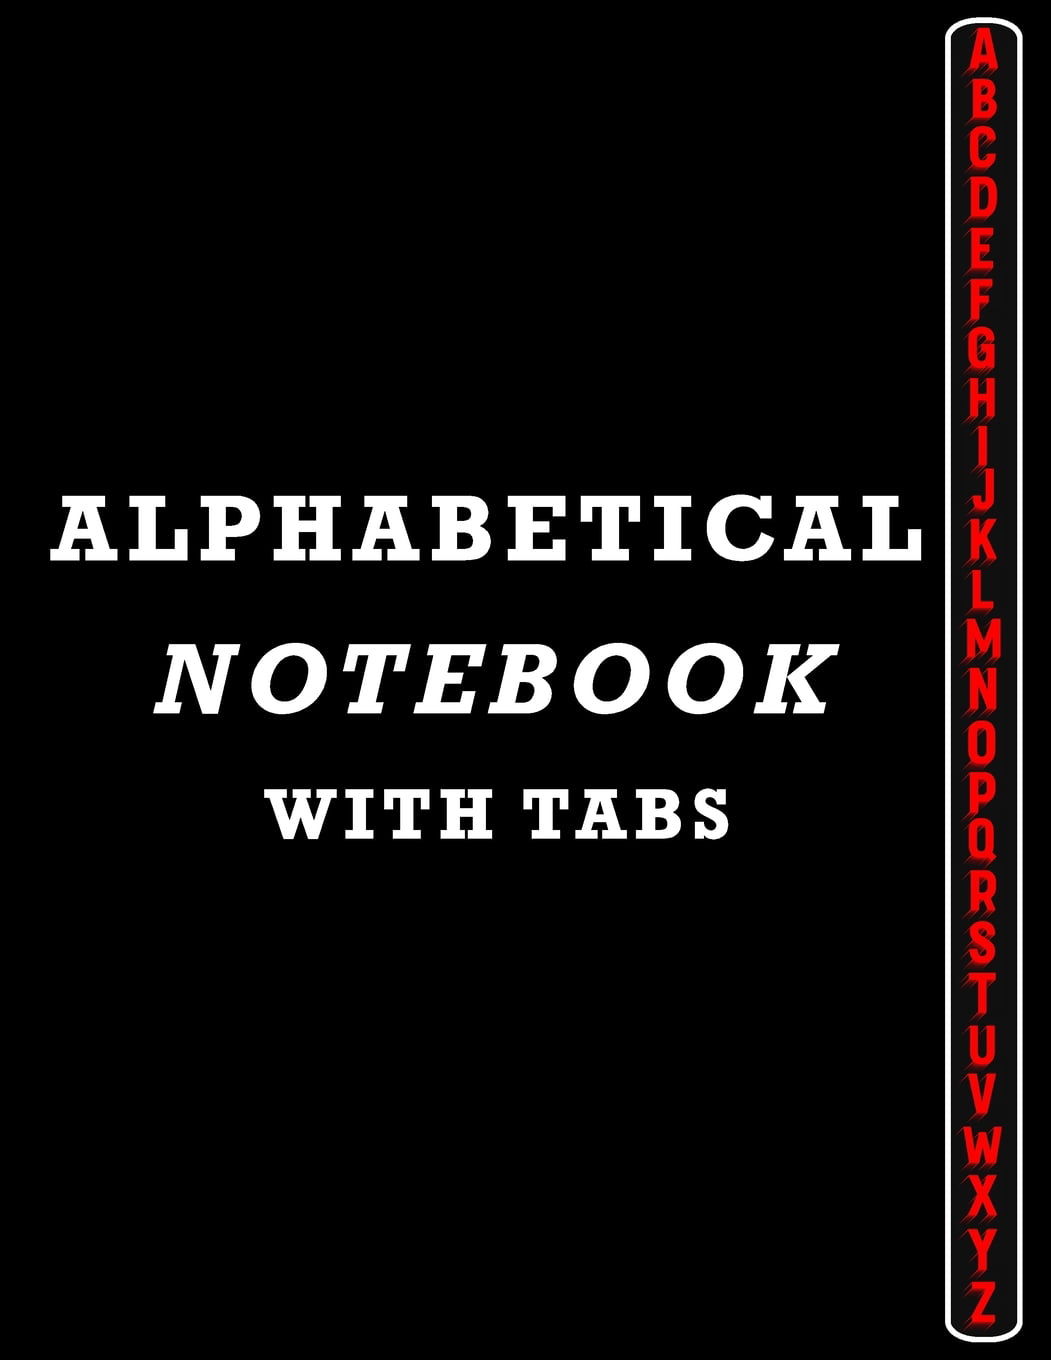 Alphabetic Password Book Large Lined-Journal Organizer with A-Z Index Tabs Printed Green Design Alphabetical Notebook with Tabs